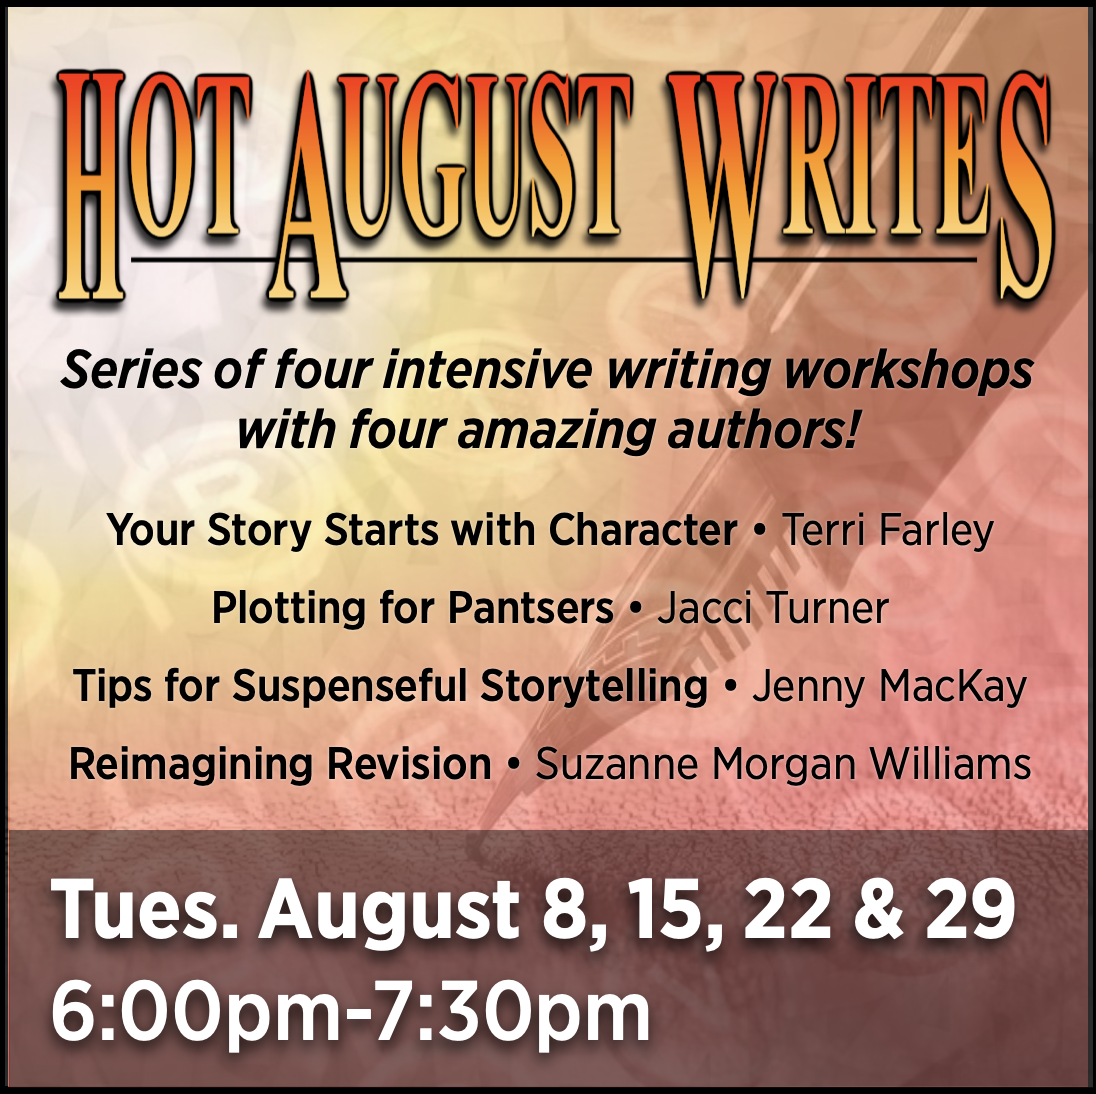 Hot August Writes